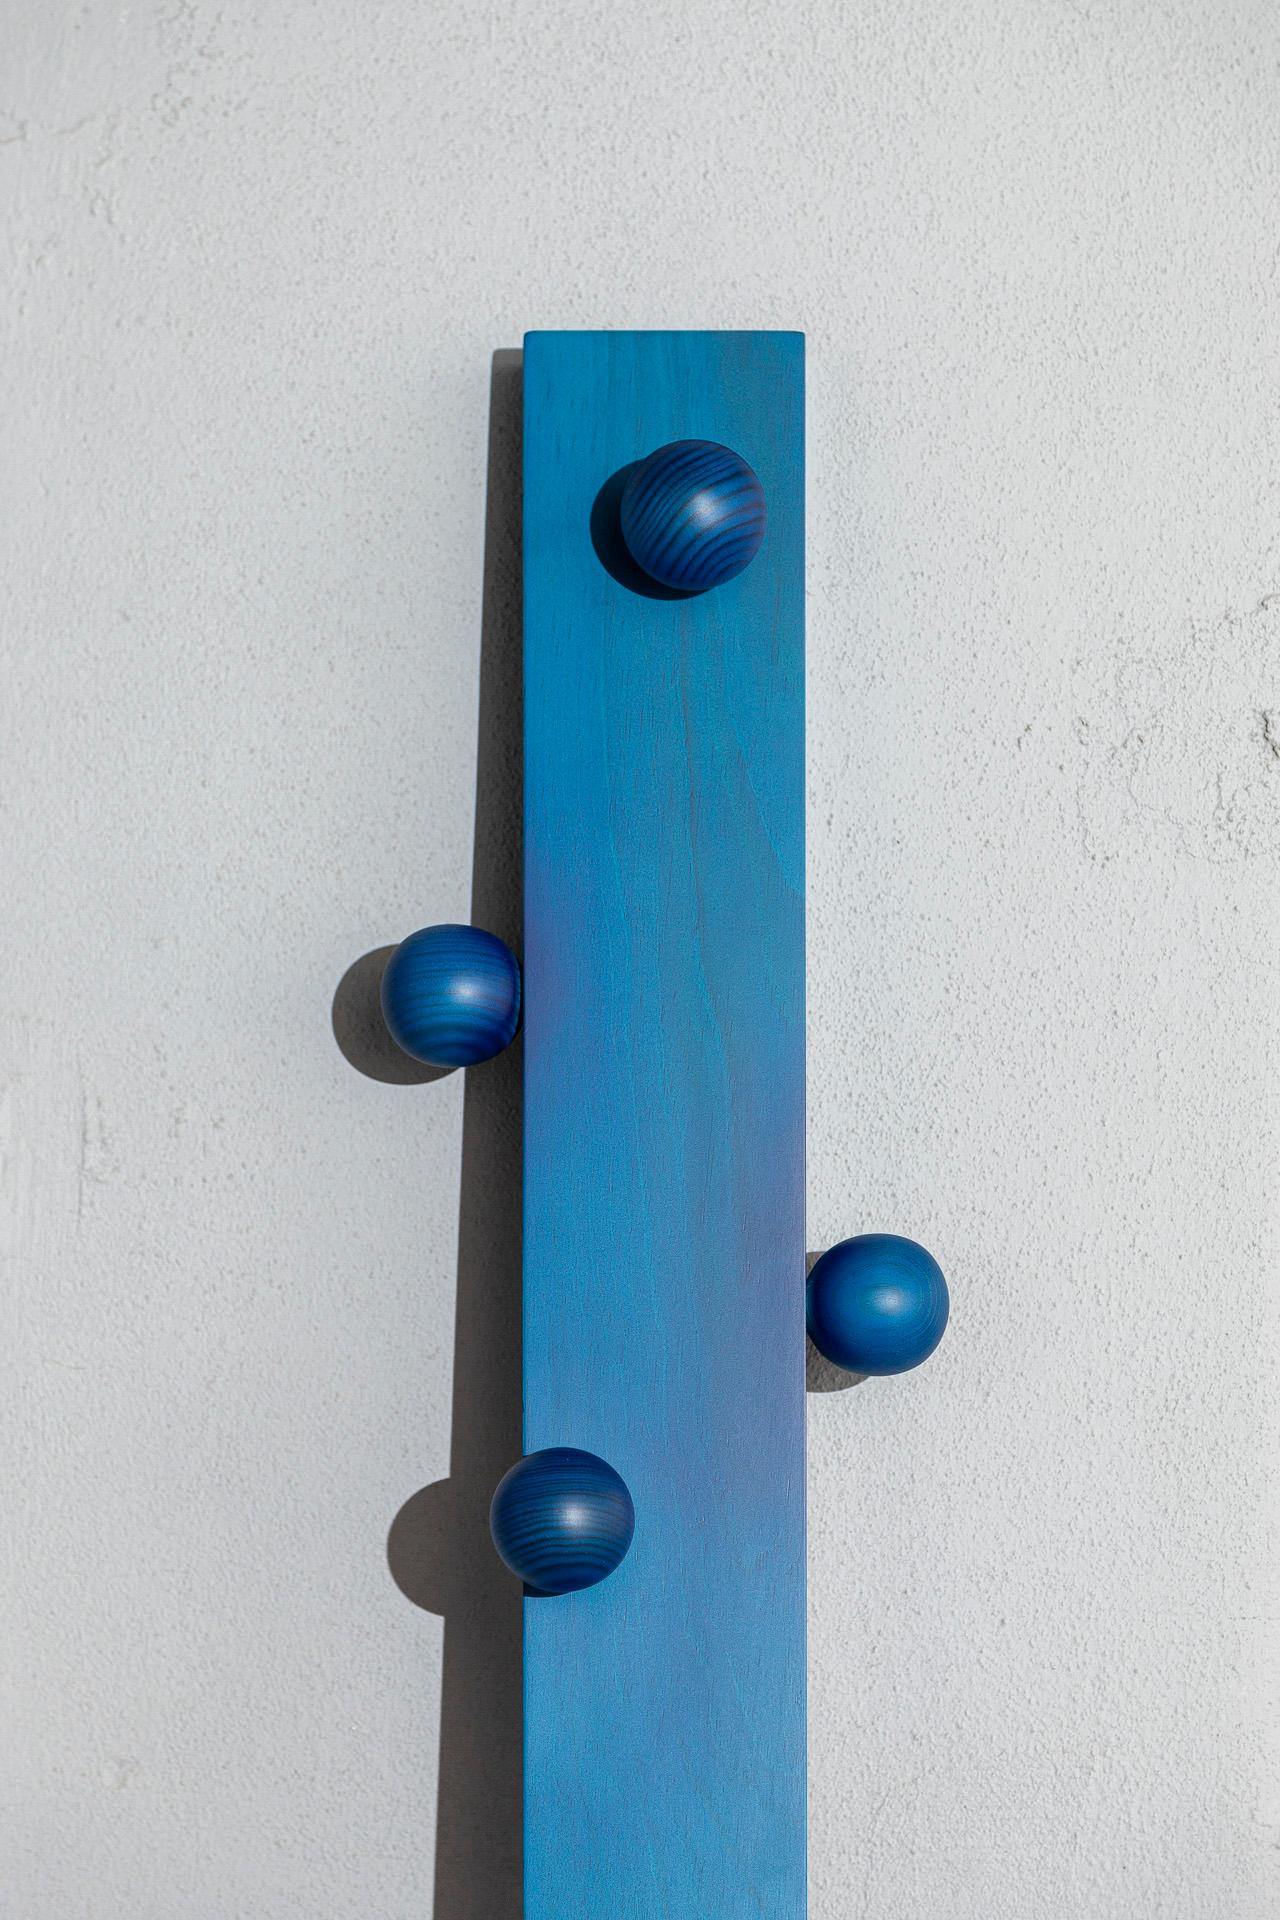 Burly is the name of this collection, made for VICARA, of solid pine wood coat hangers. Designed by João Xará and handmade in Portugal, this coat hanger has a set of spheres - made with the help of an artisan specialized in turned wood - serving as